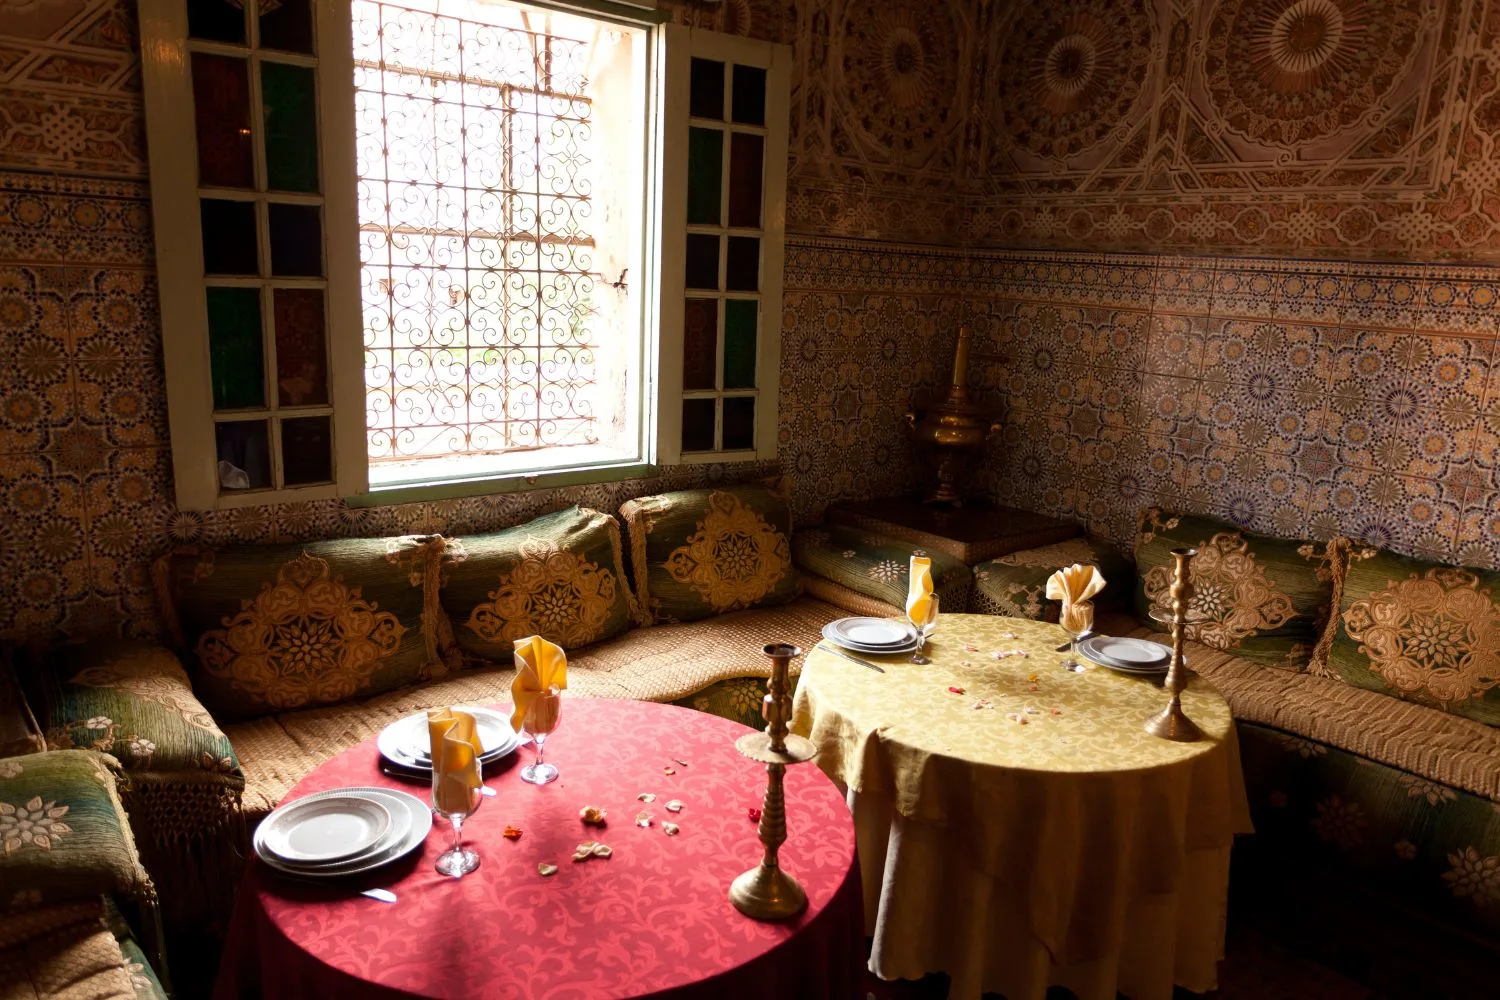 Inside a traditional Moroccan house prepared for visitors